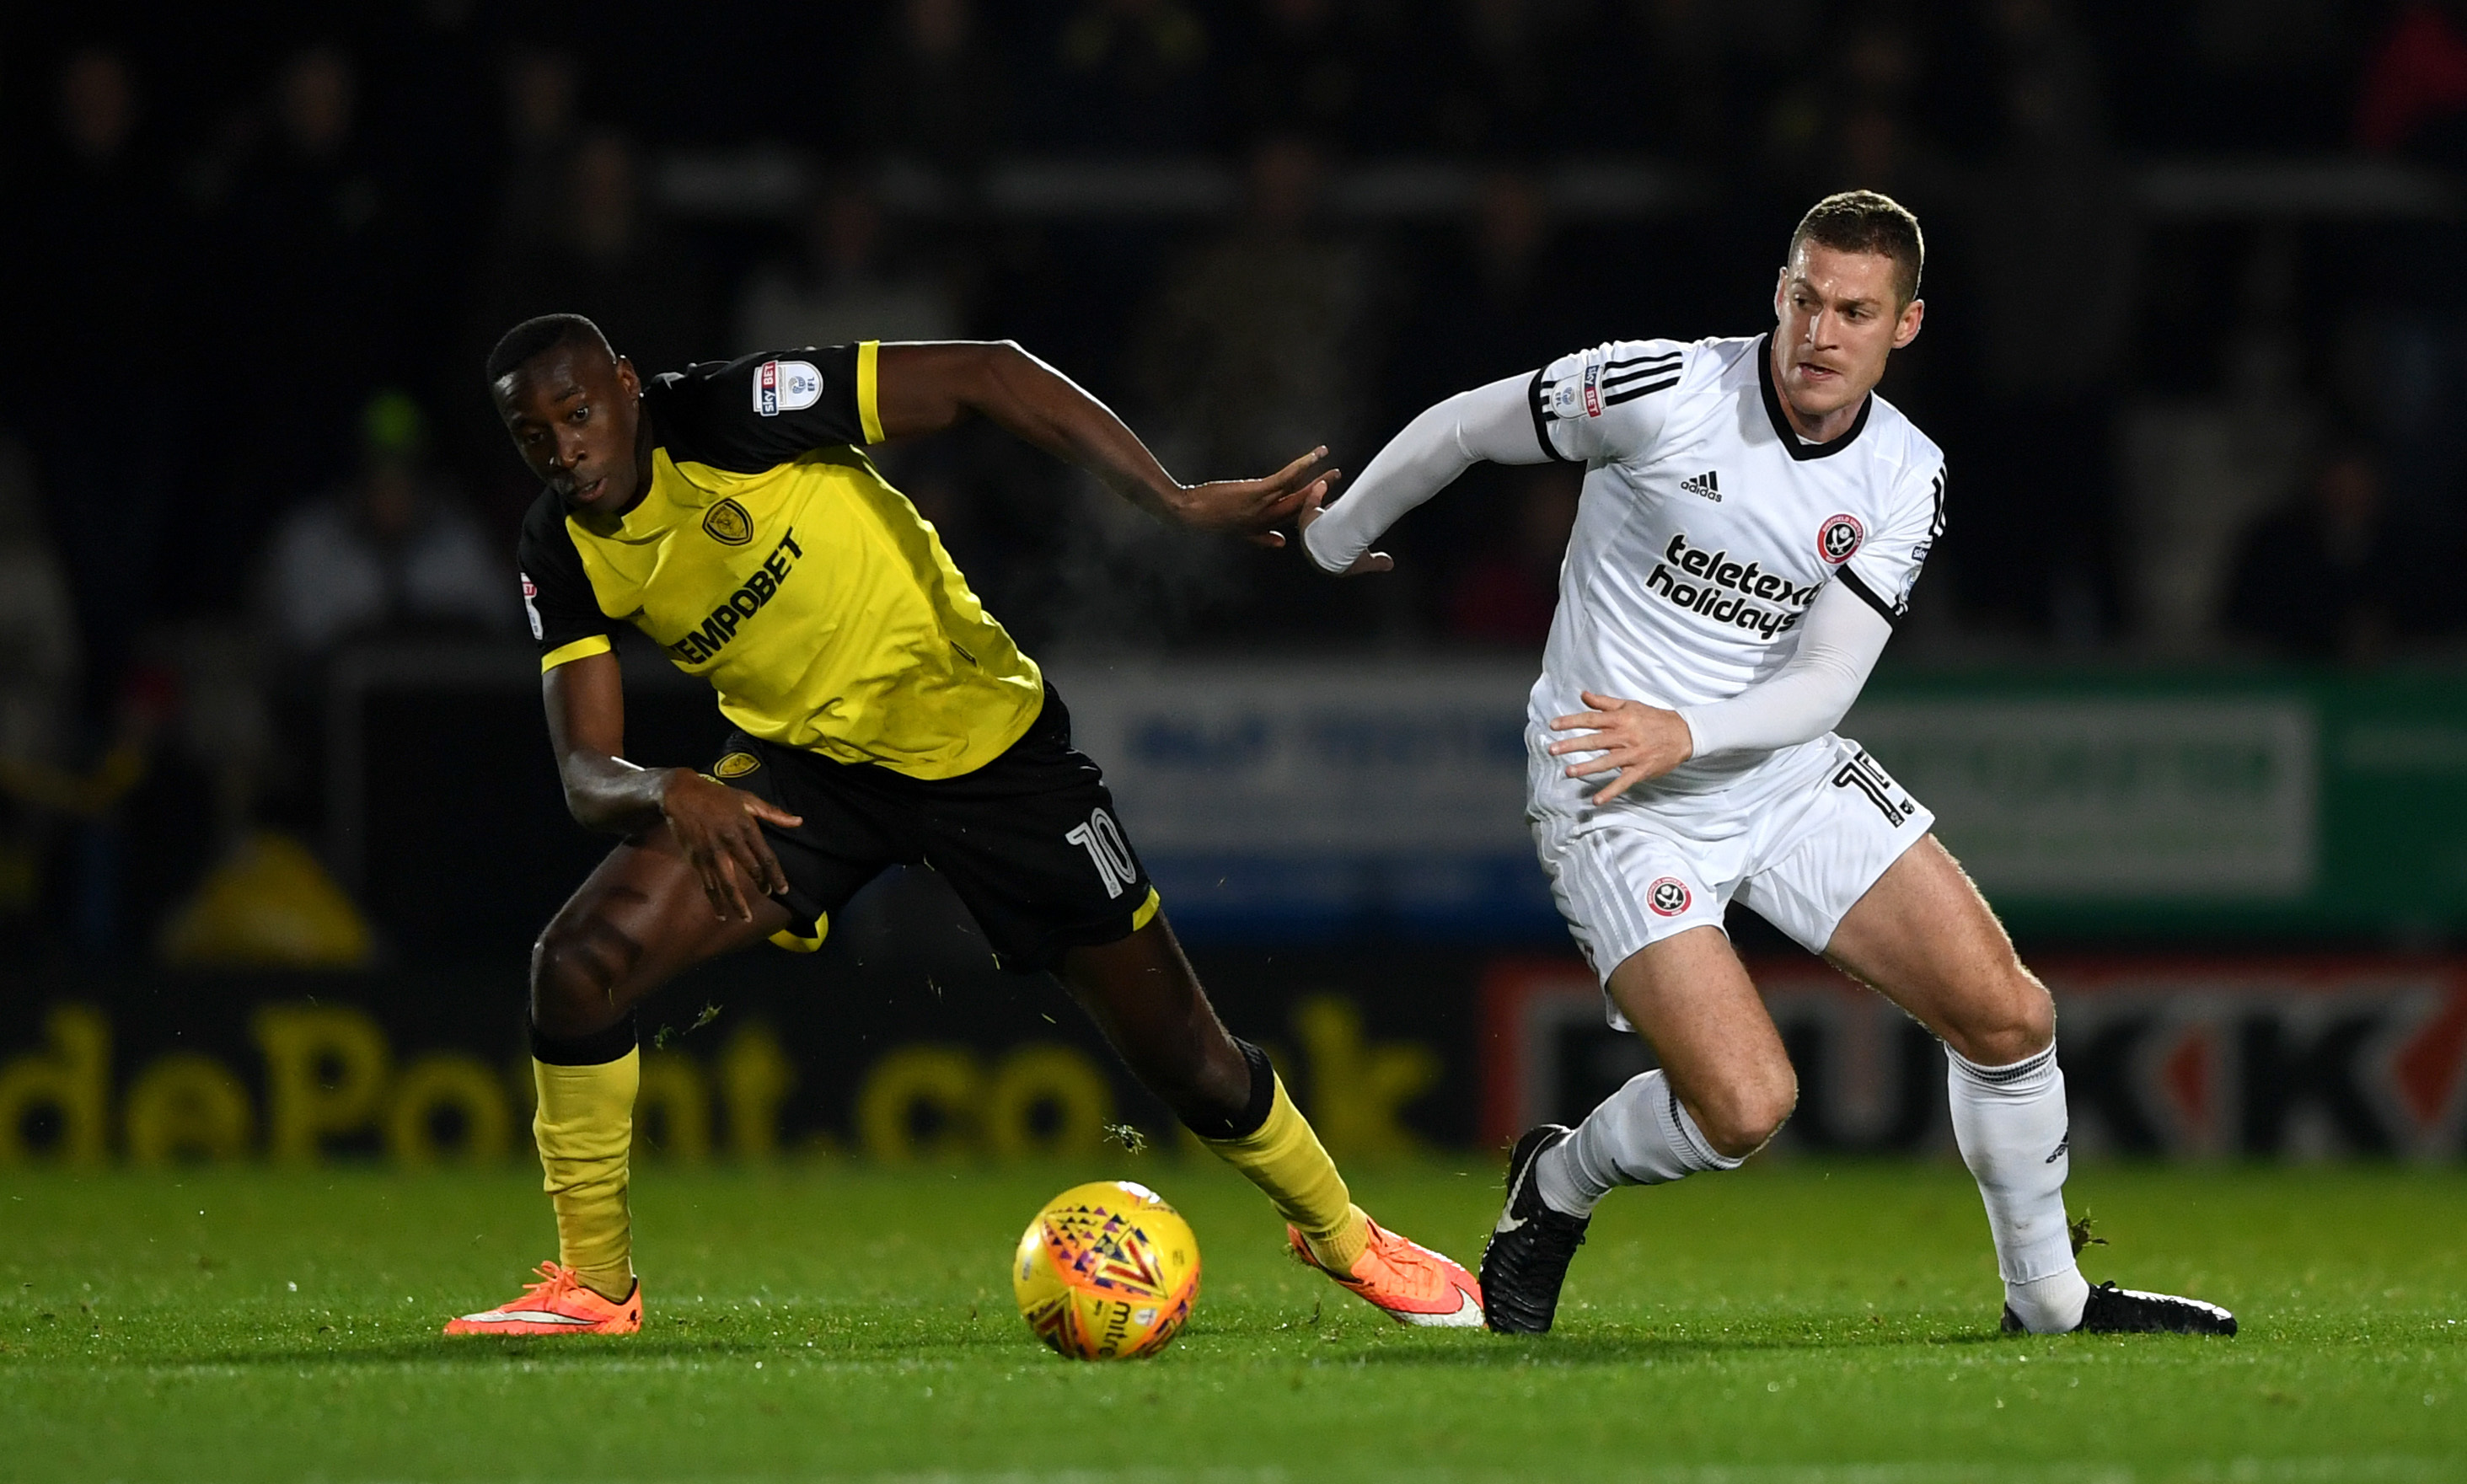 Paul Coutts in action against Burton Albion in the game he broke his leg.